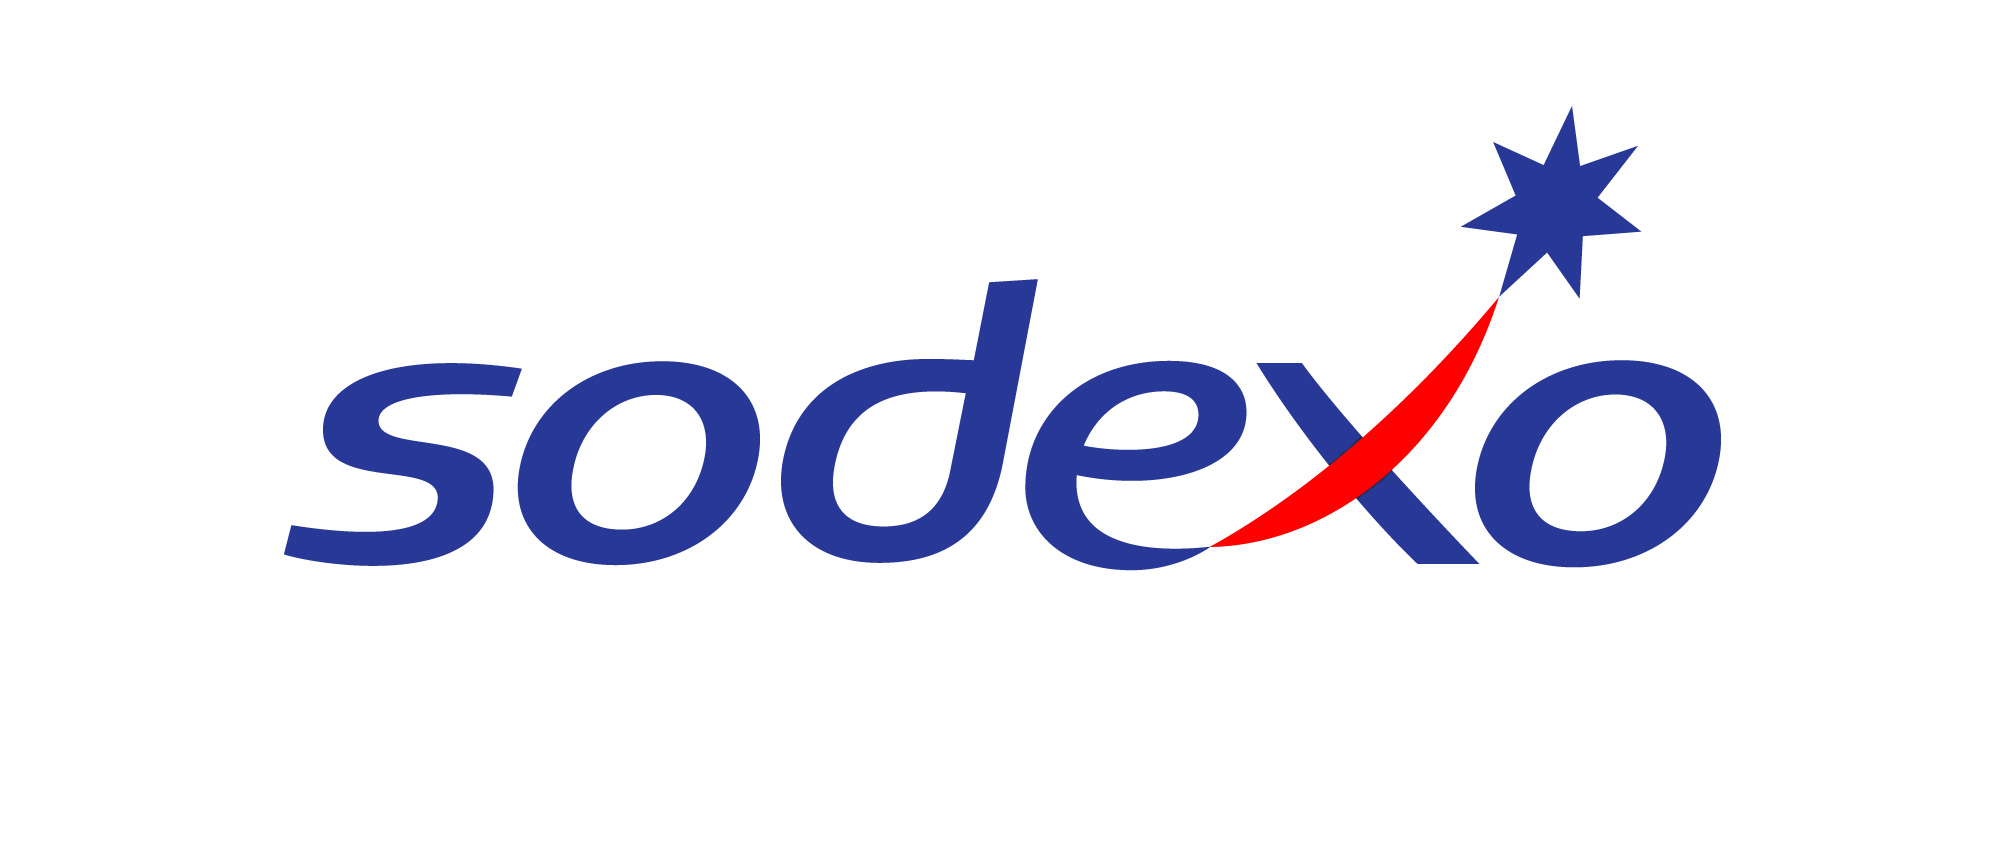 Sodexo Portal ADP Employee Benefits and Payroll Management Guide